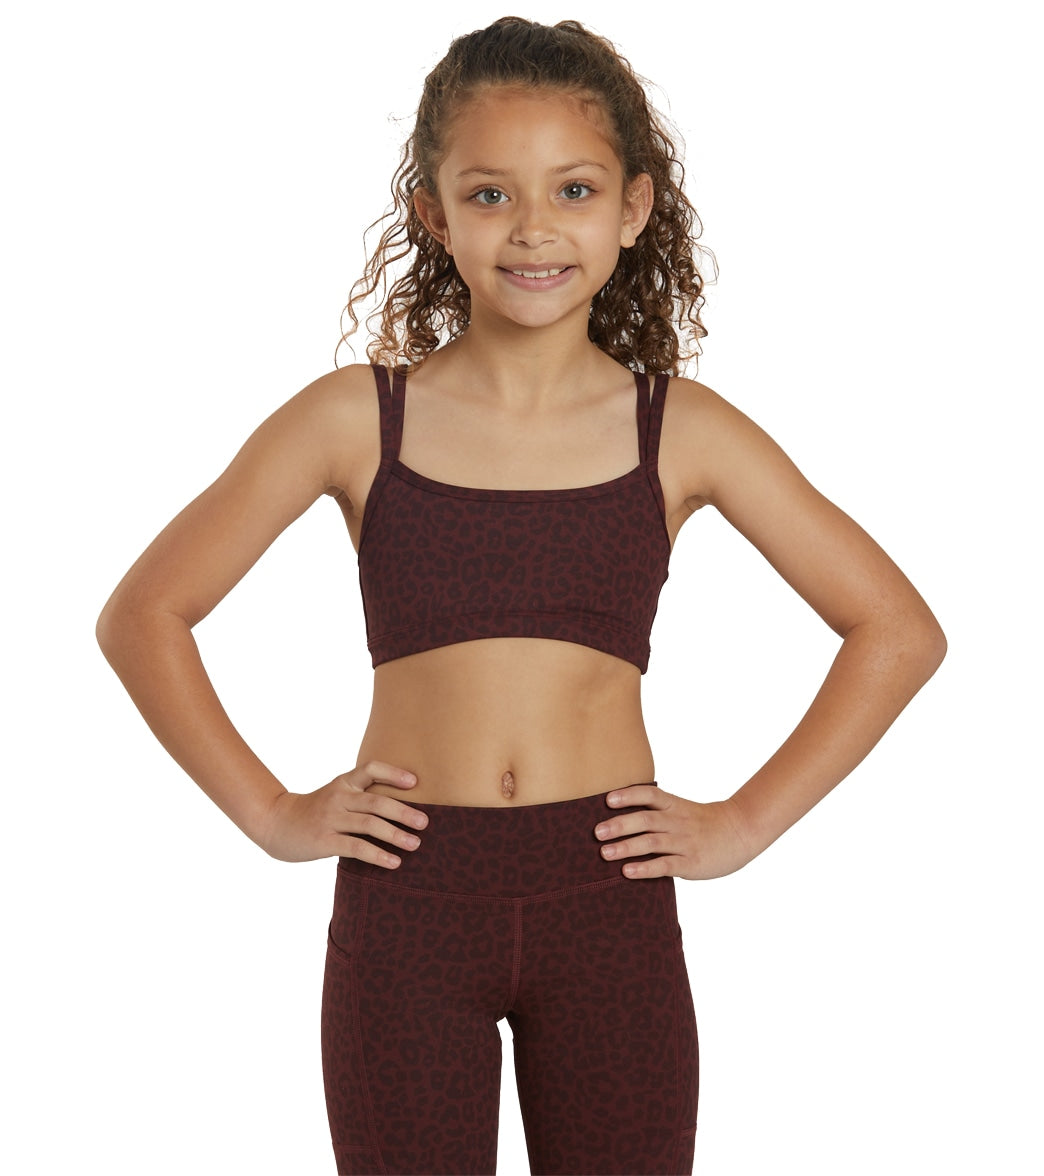 Everyday Yoga Girl's Wholesome Cheetah Sports Bra at YogaOutlet.com –